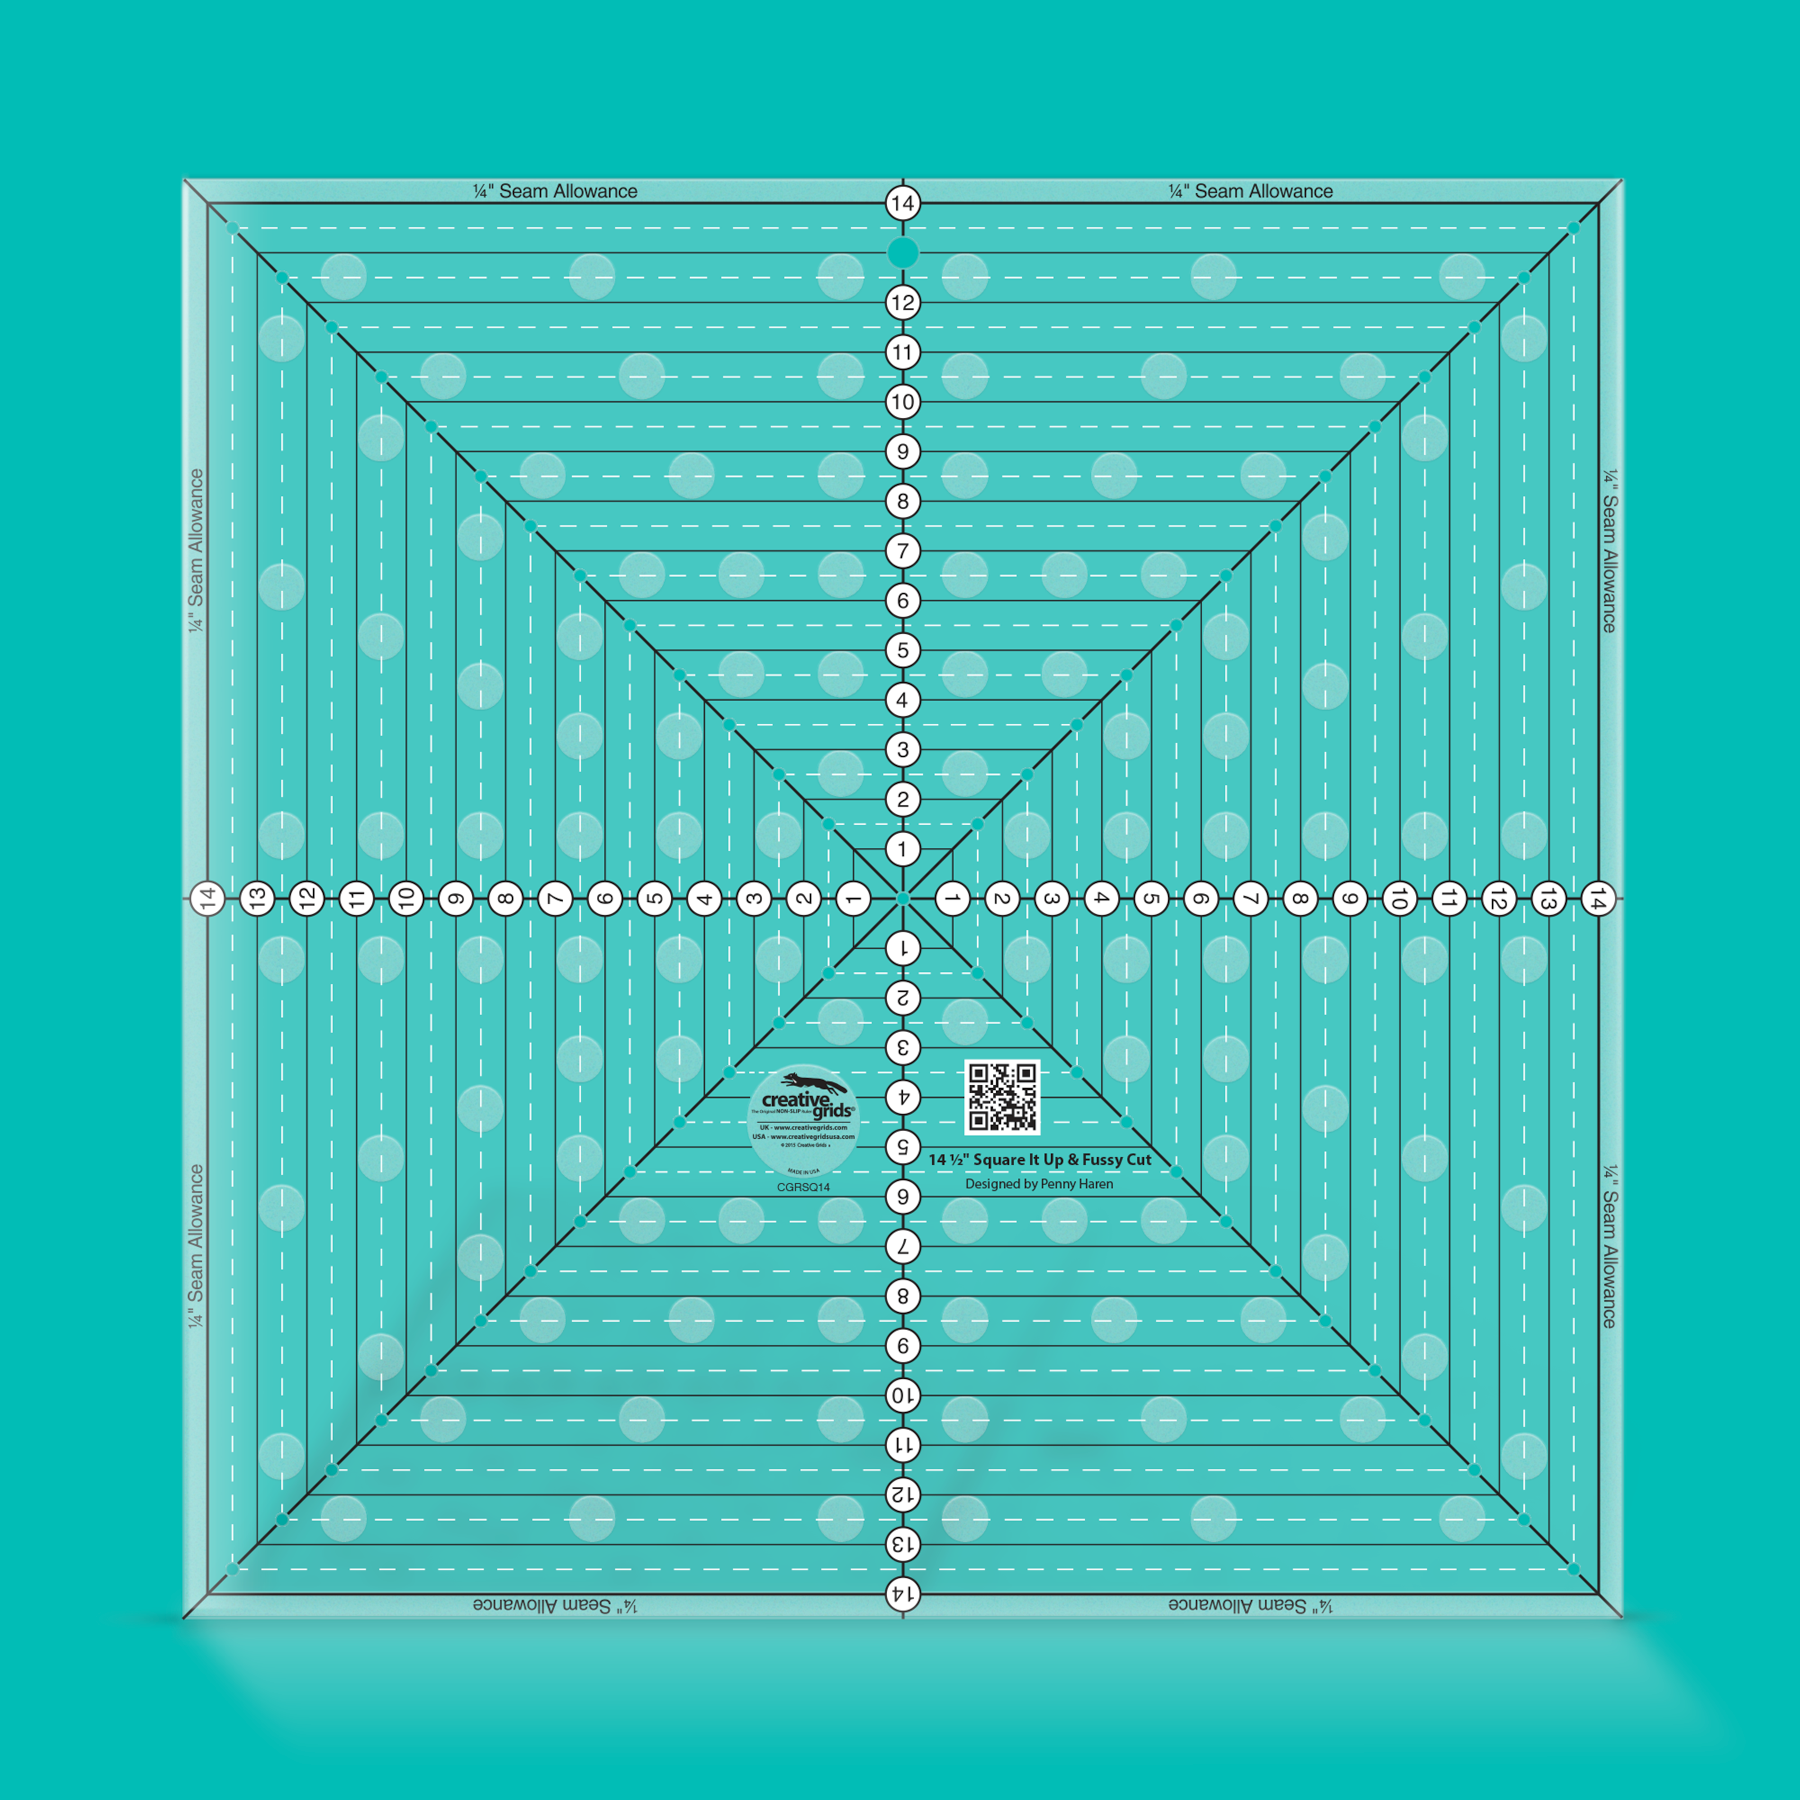 Creative Grids 14.5" Square It Up or Fussy Cut Square Ruler CGRSQ14 for Sale at World Weidner